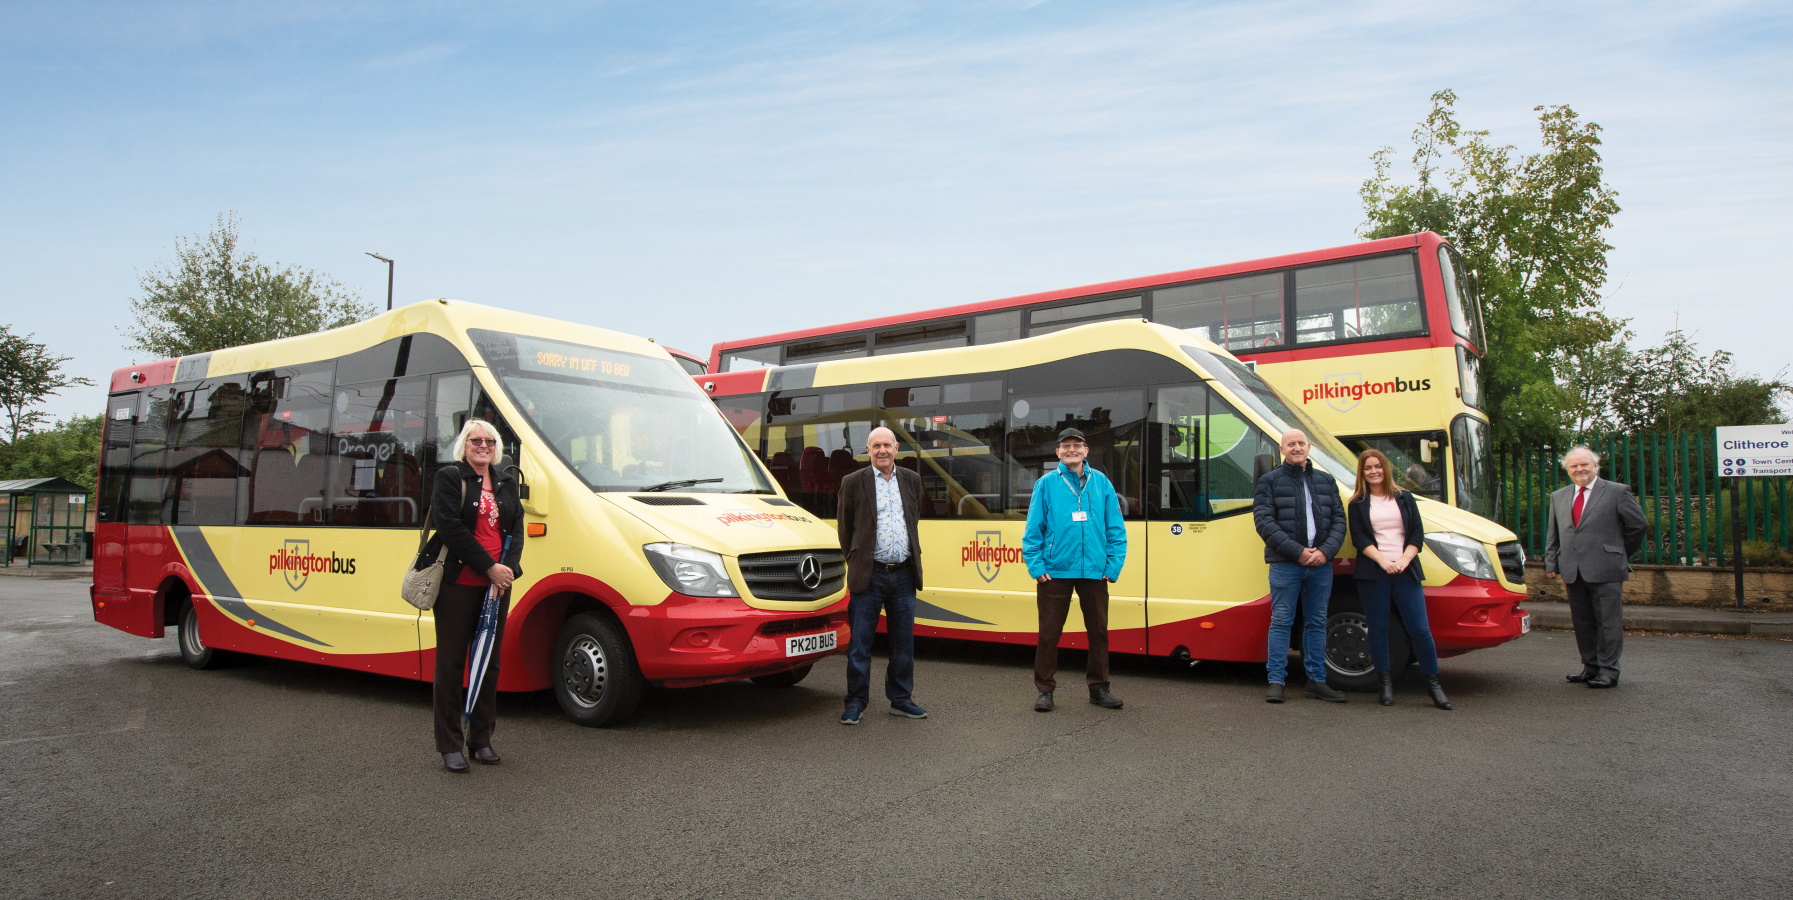 Pilkington Bus Announces Four New Routes, Four New Vehicles, and Eight New Drivers in a £3 Million Contract